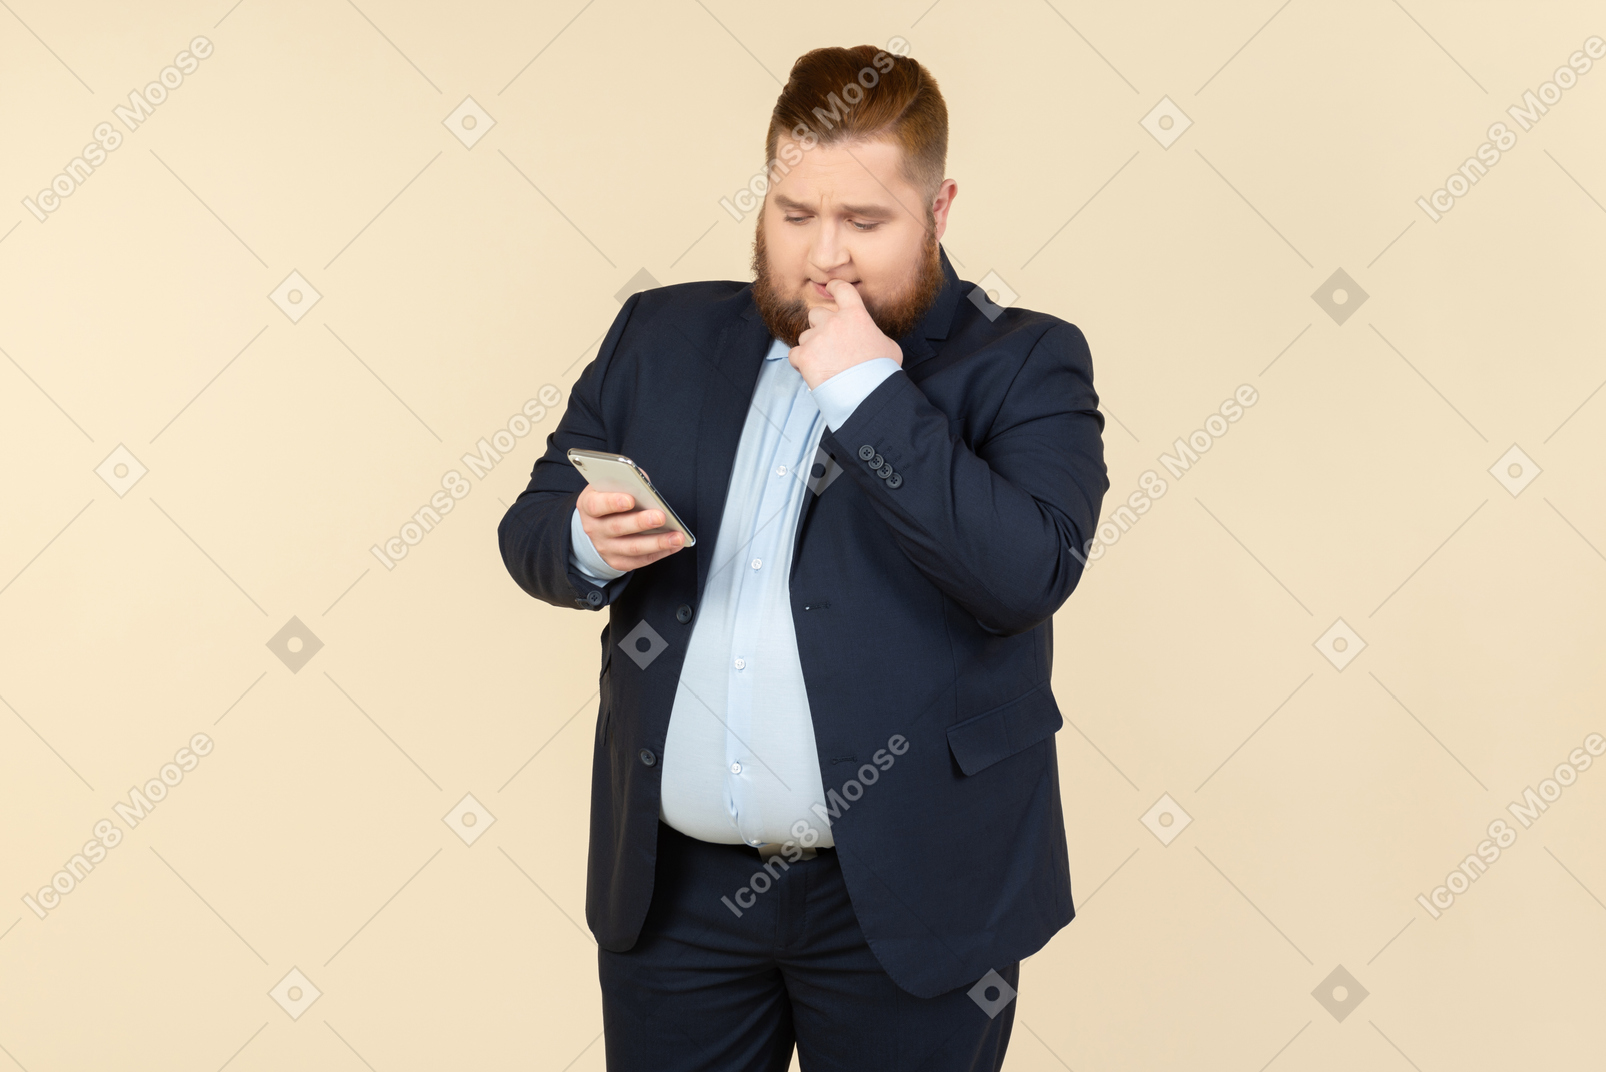 Doubtful young overweight man holding smartphone